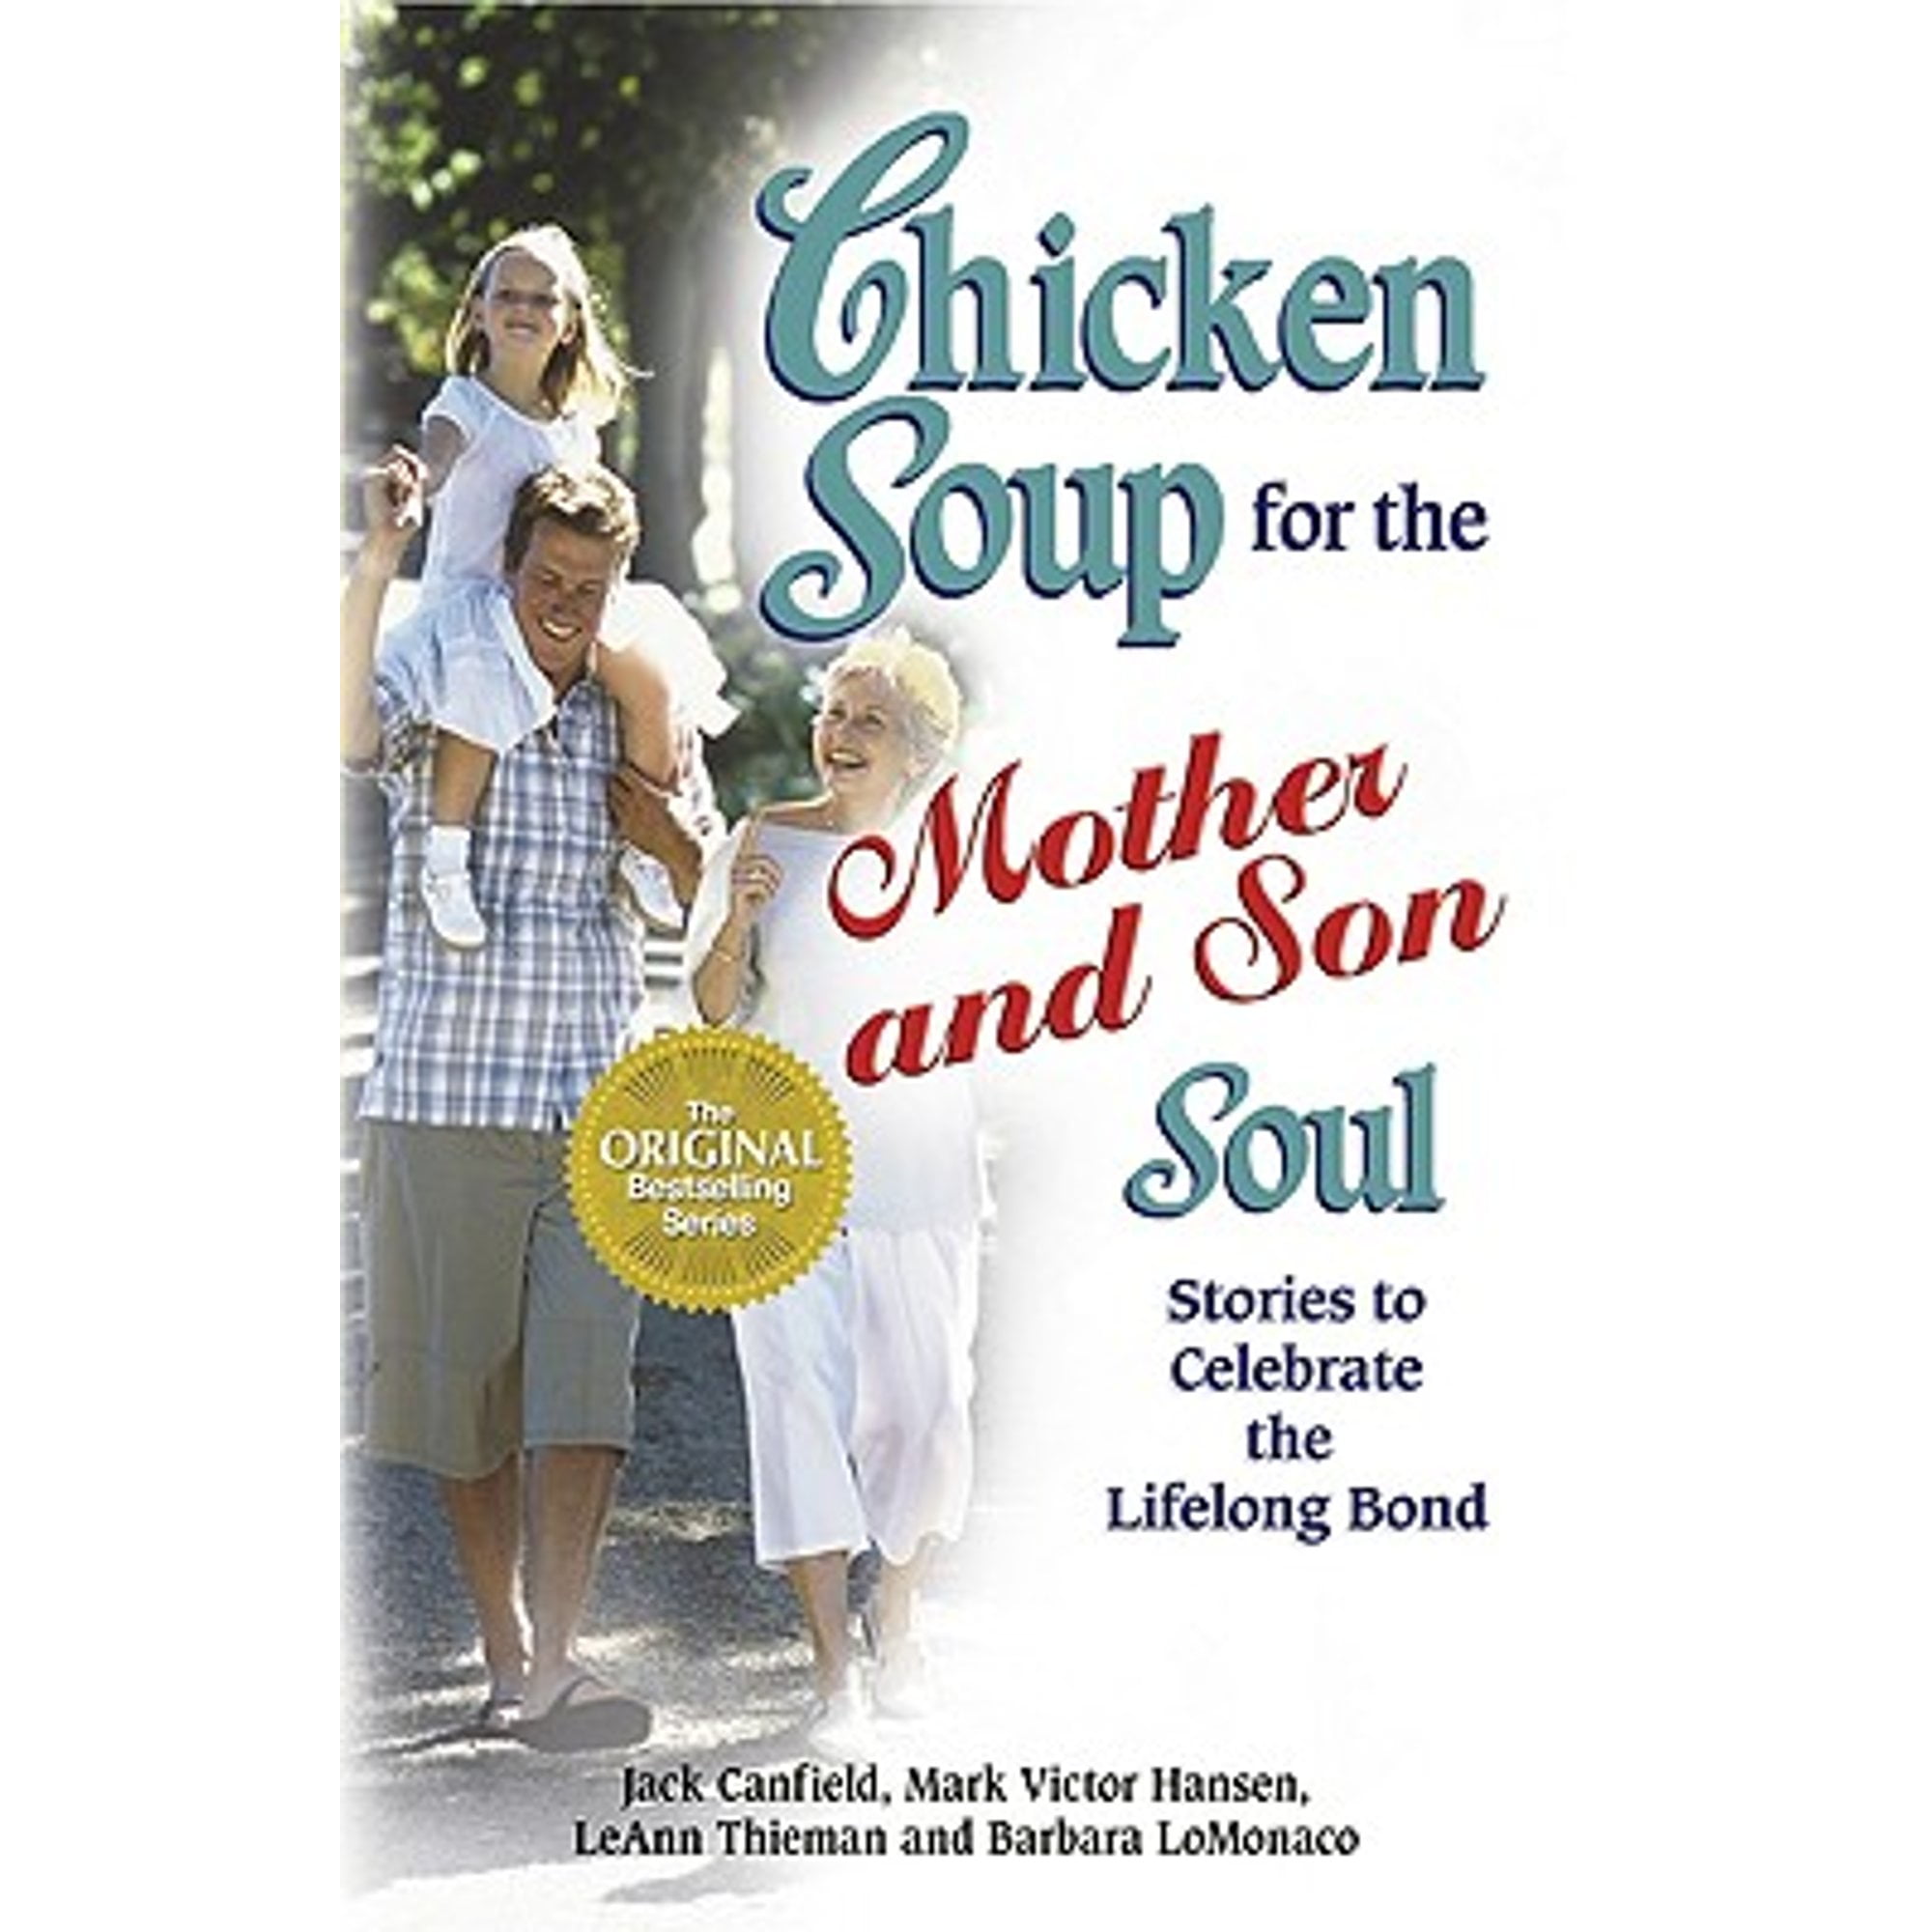 debbie persaud recommends mother and son stories pic